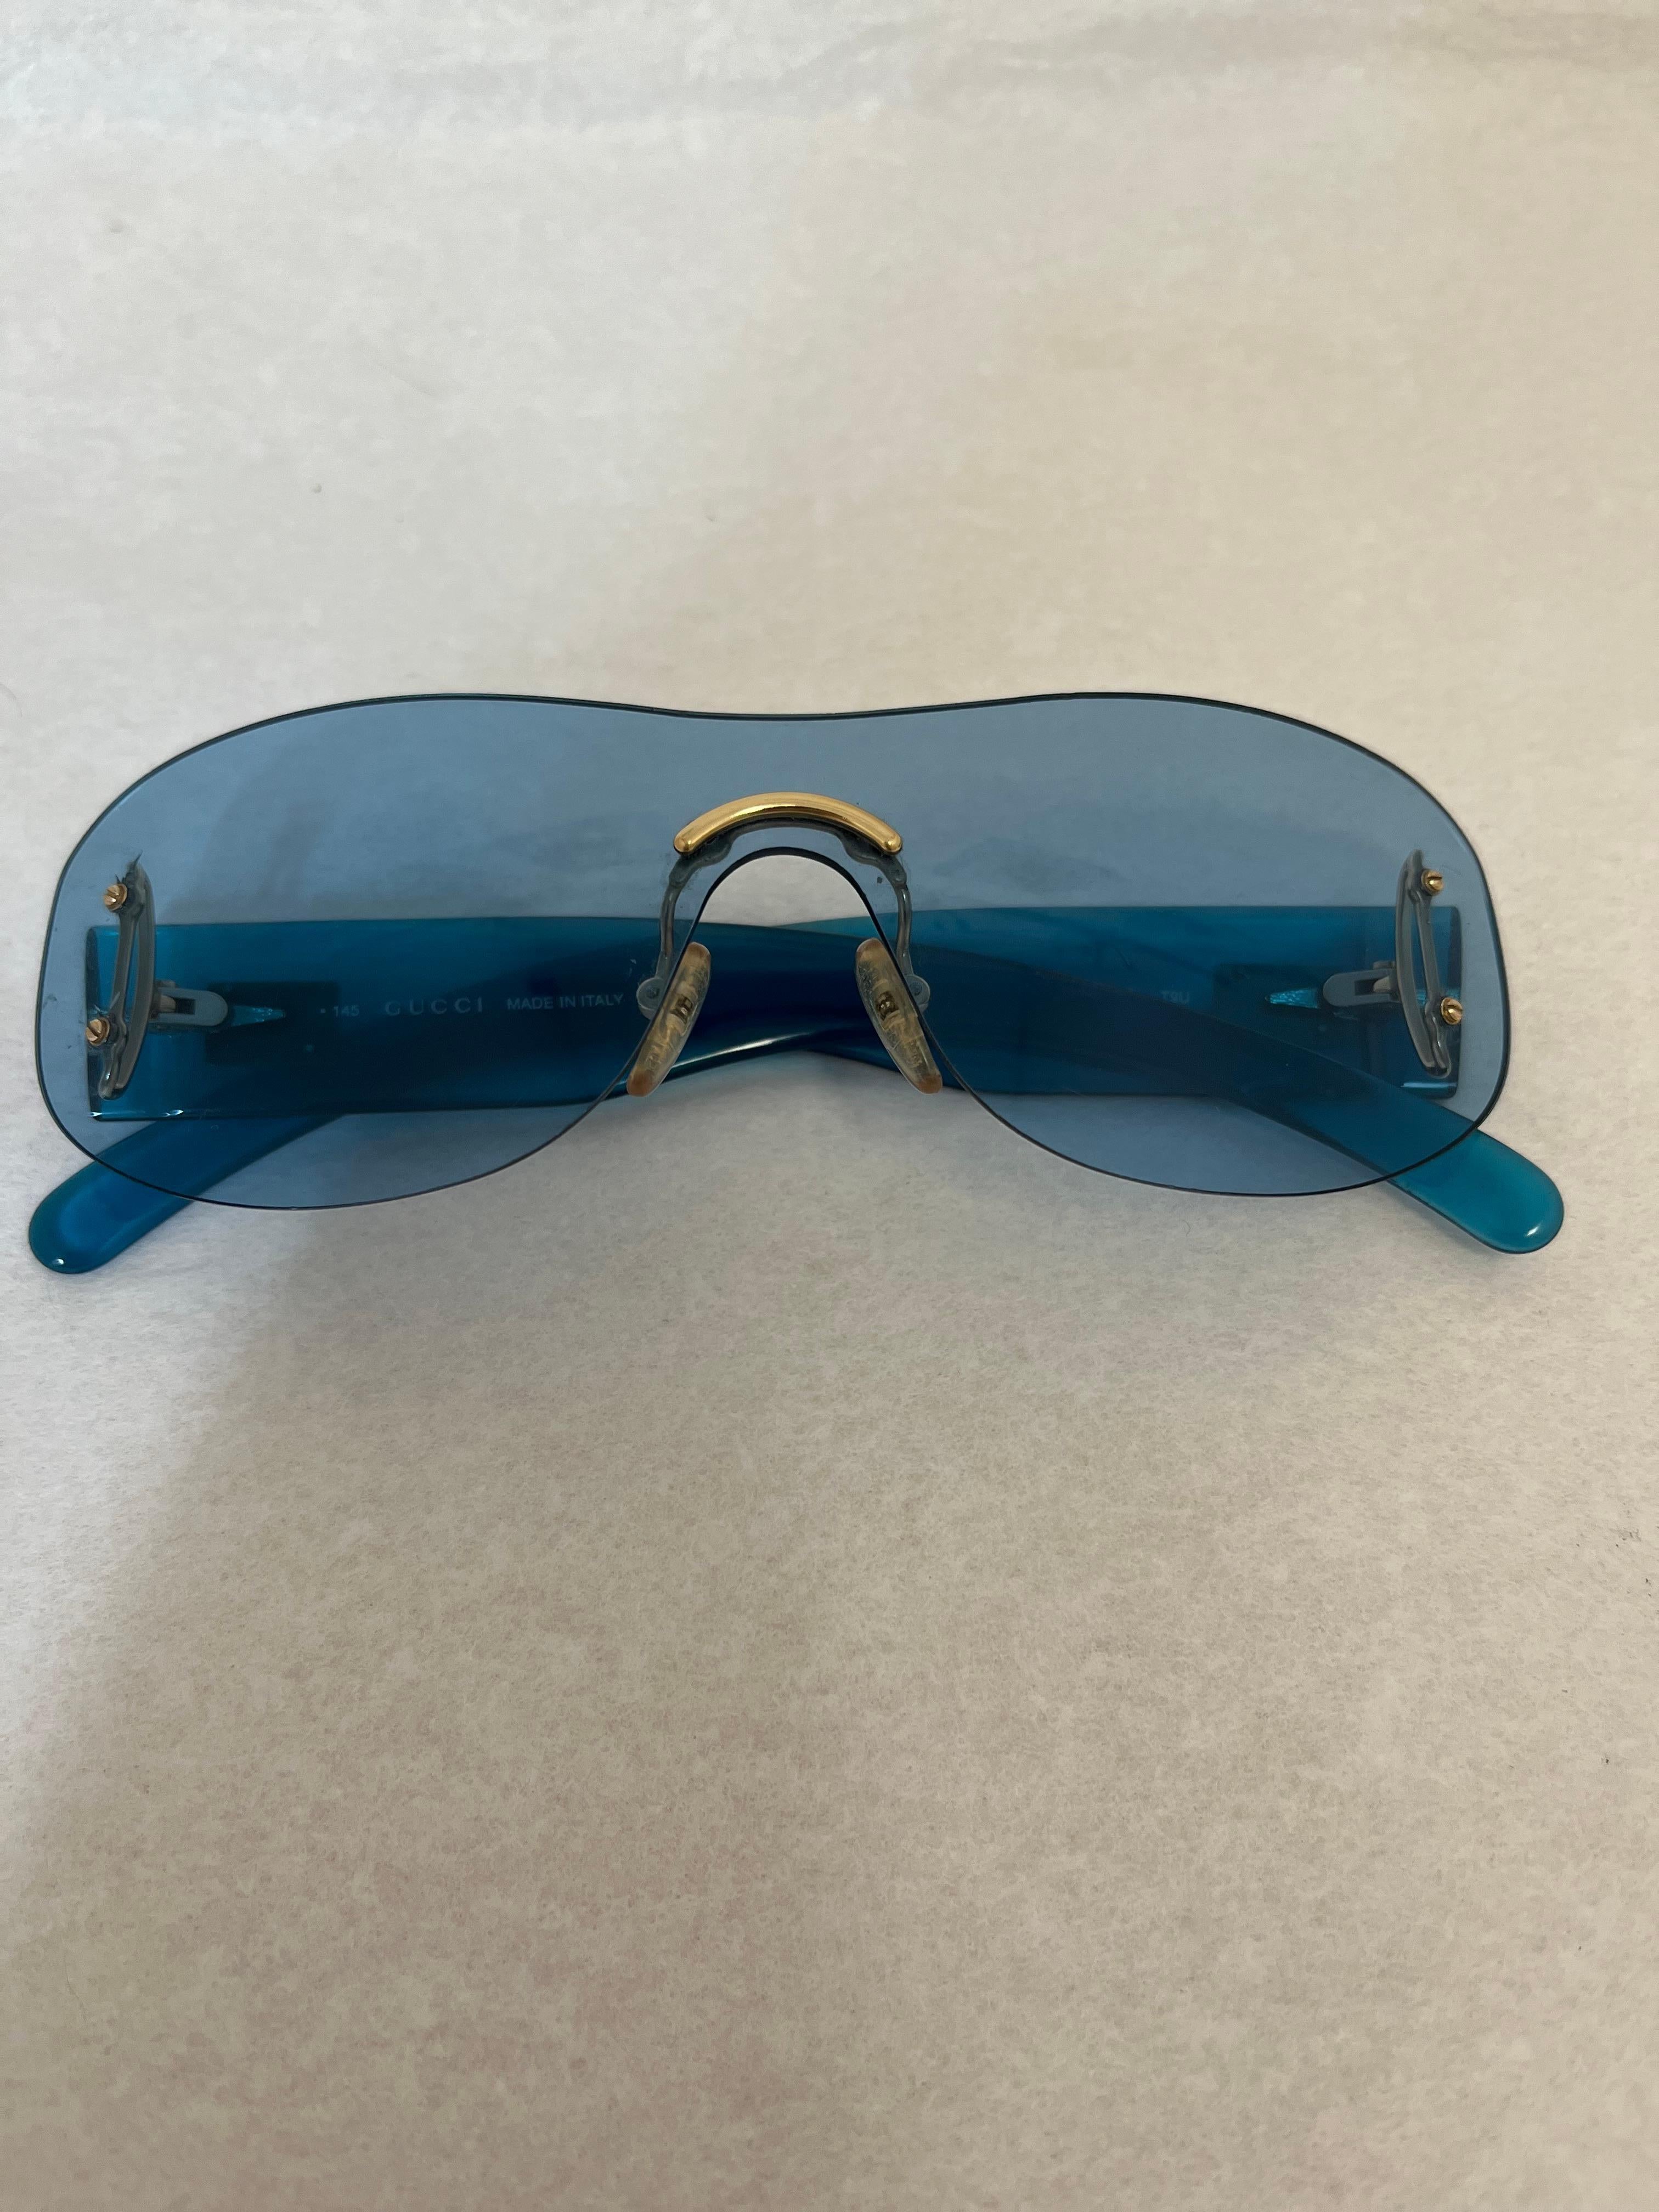 Designed by Tom Ford these blue sunglasses may be from the 1990s but are still much sought after. They are in mint condition and come with a Gucci case.
The model is GG2448/N/S can still be found but at a much higher price.
The side are graced with